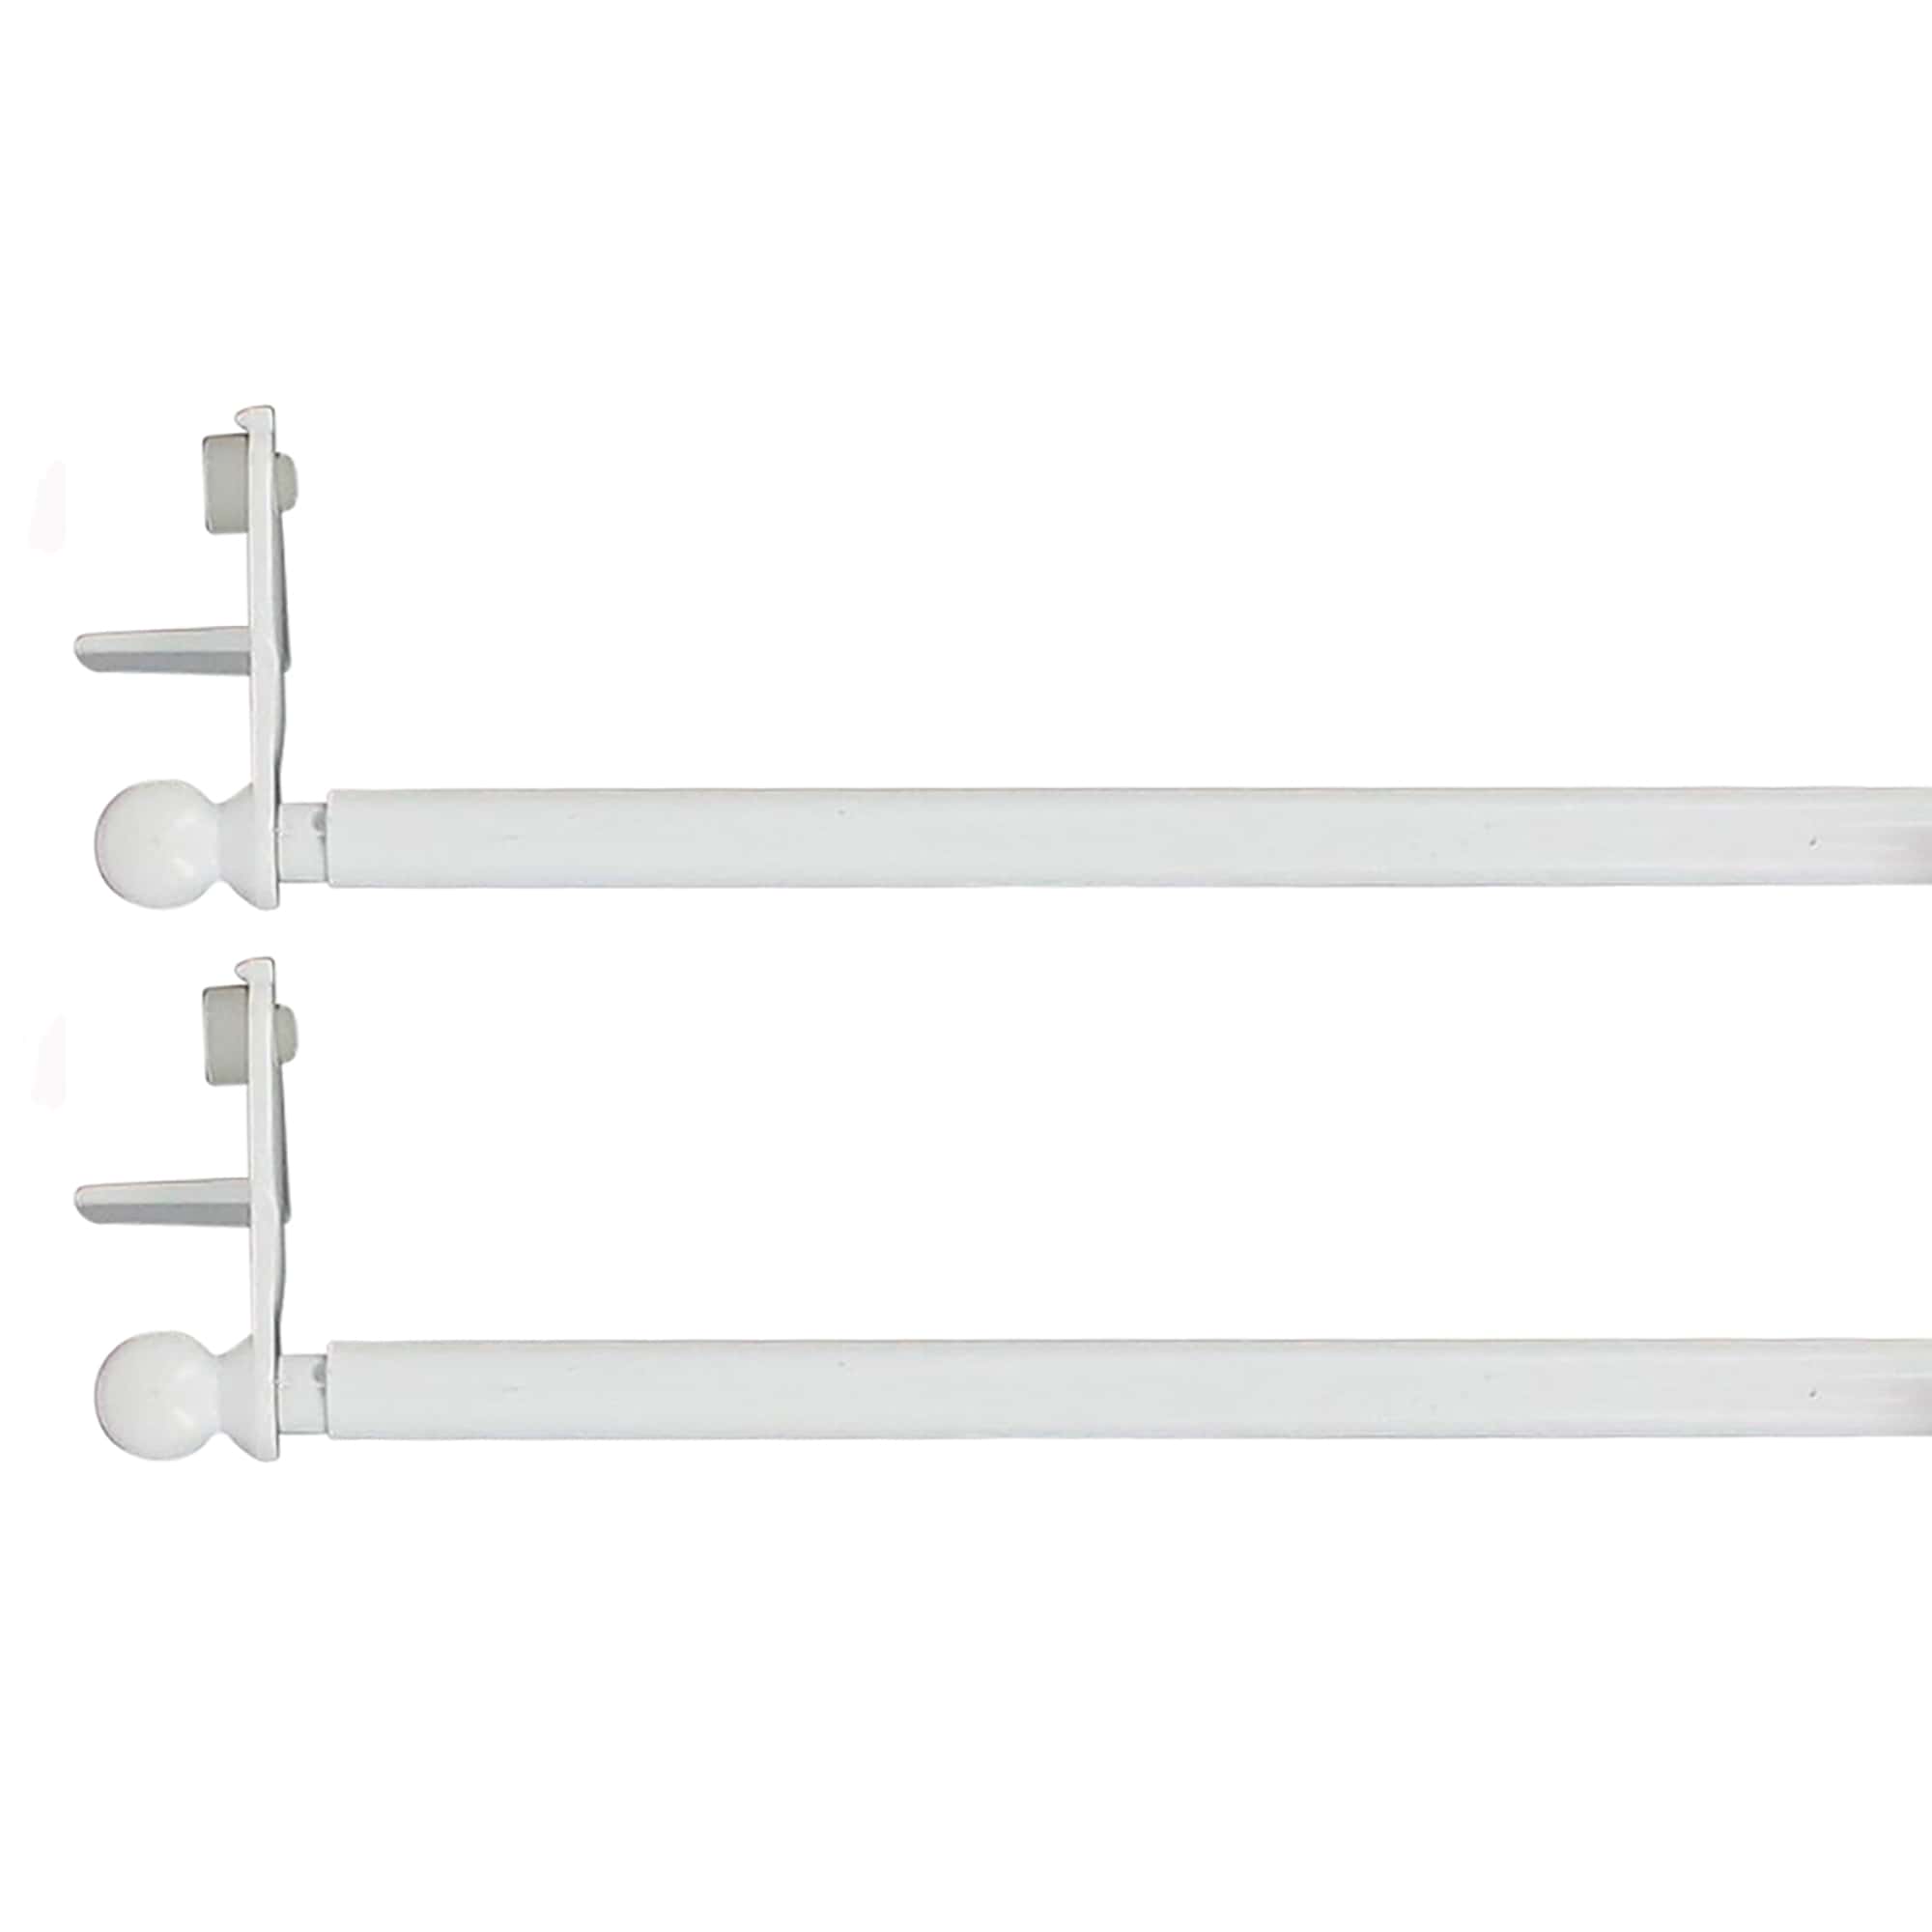 Set of 2 White Adjustable Tension Rods 20"